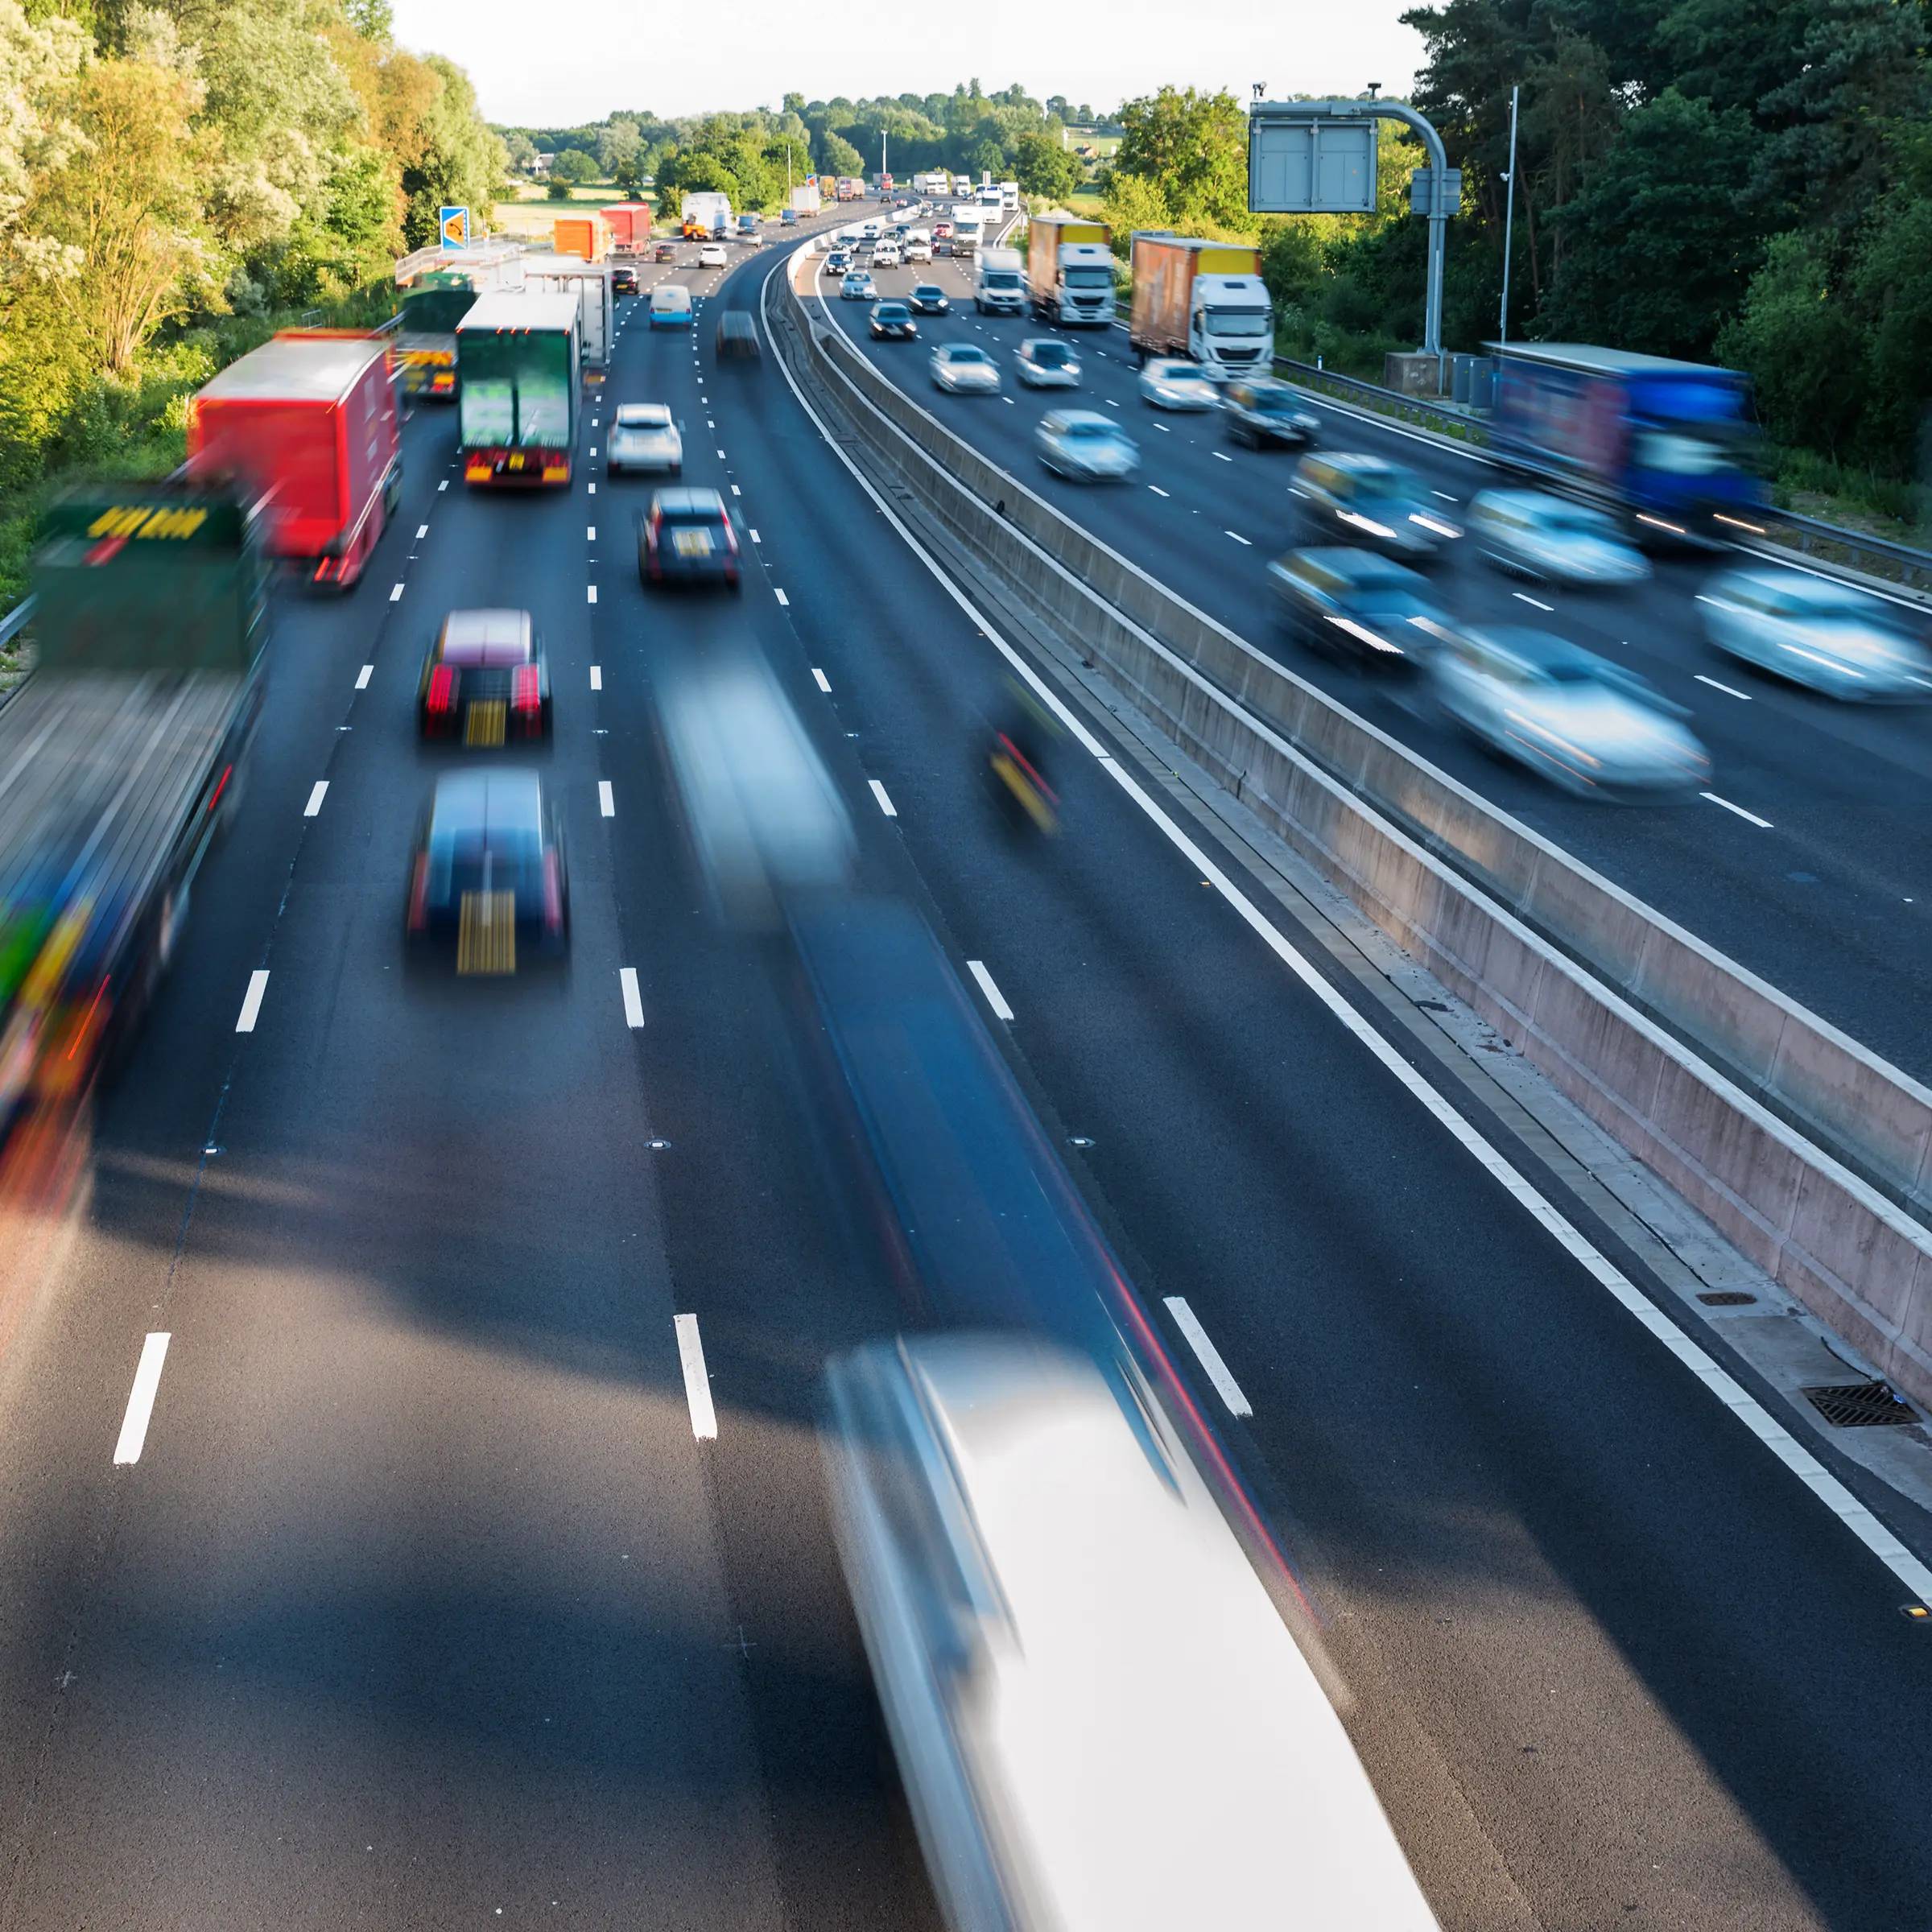 Motion blur photograph of cars and lorries driving on the motorway